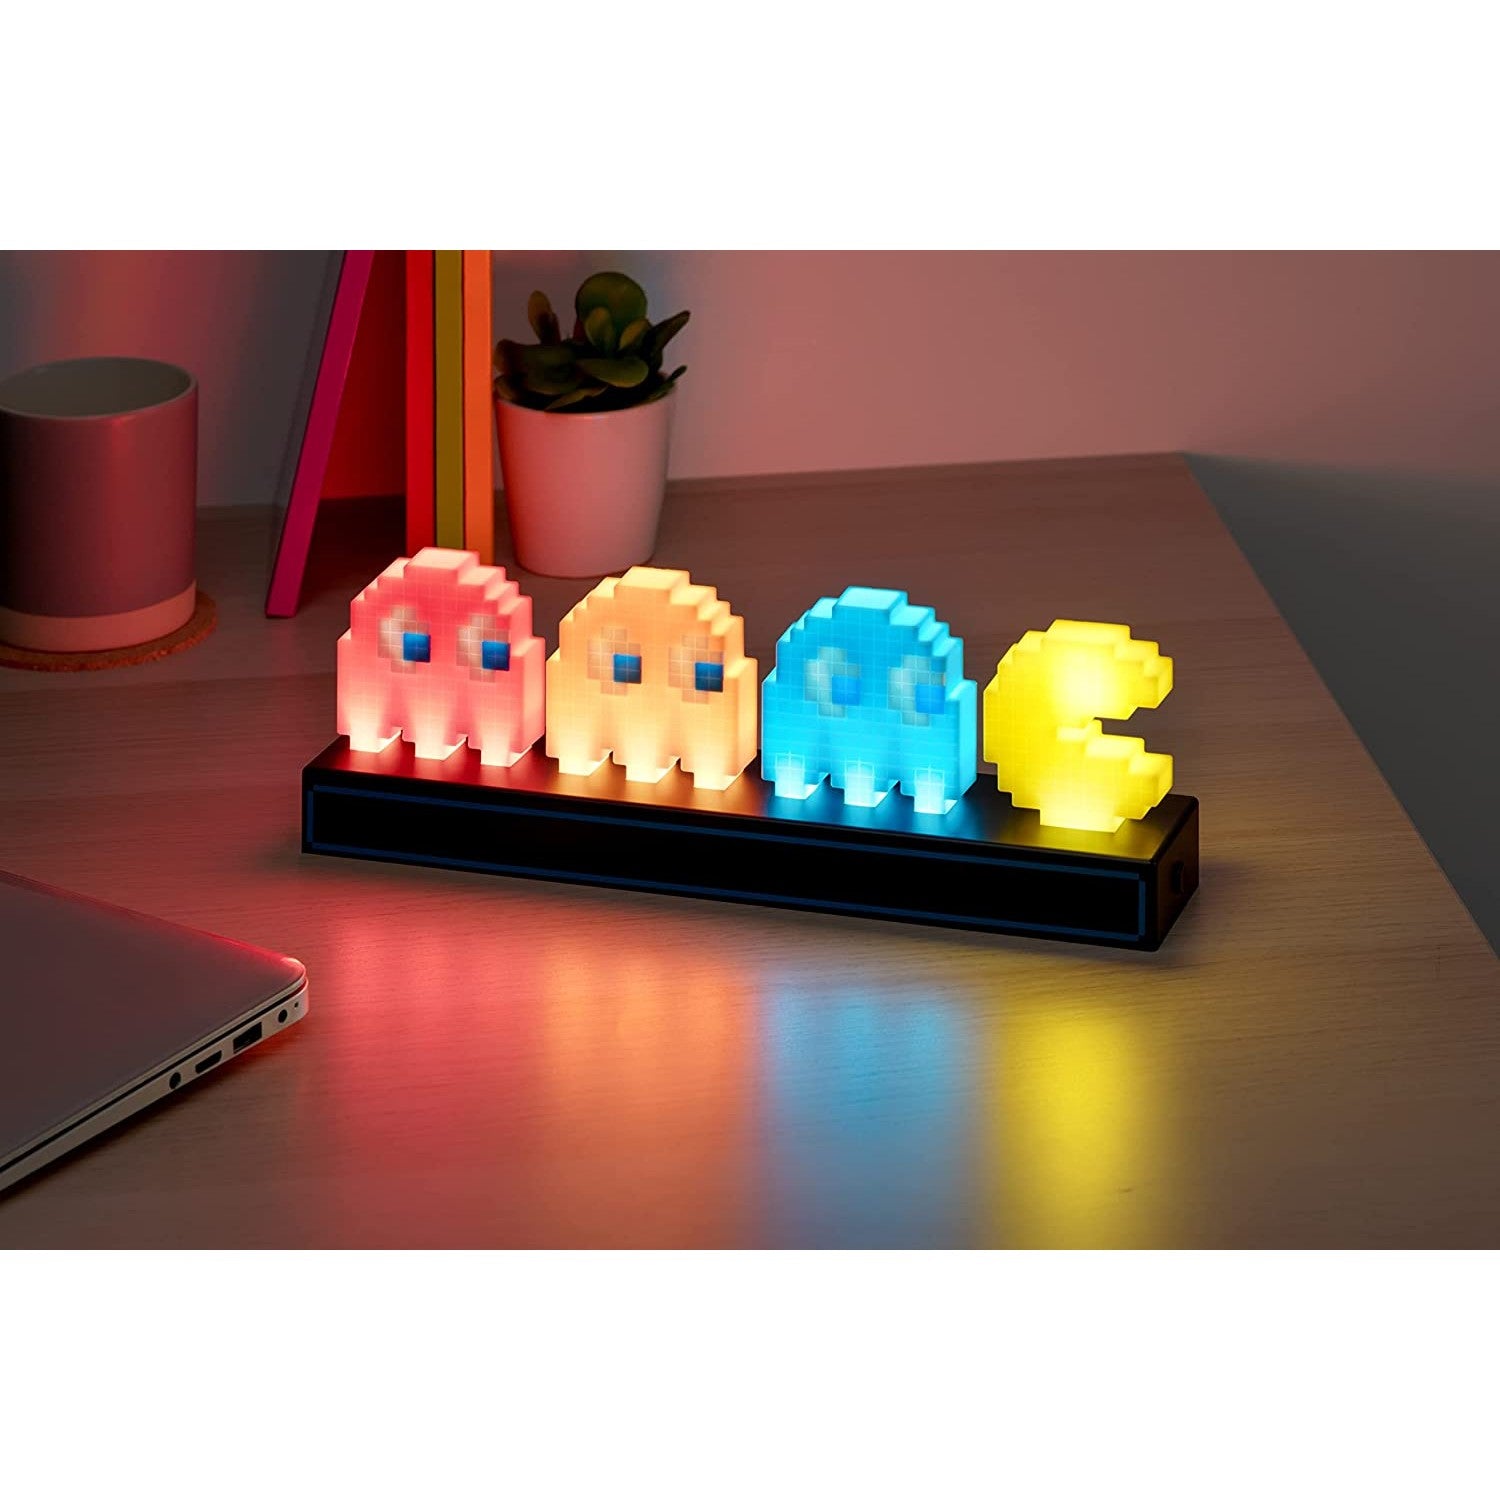 A Pac-Man with three ghosts retro-style light on a table. The lamp is switched on.